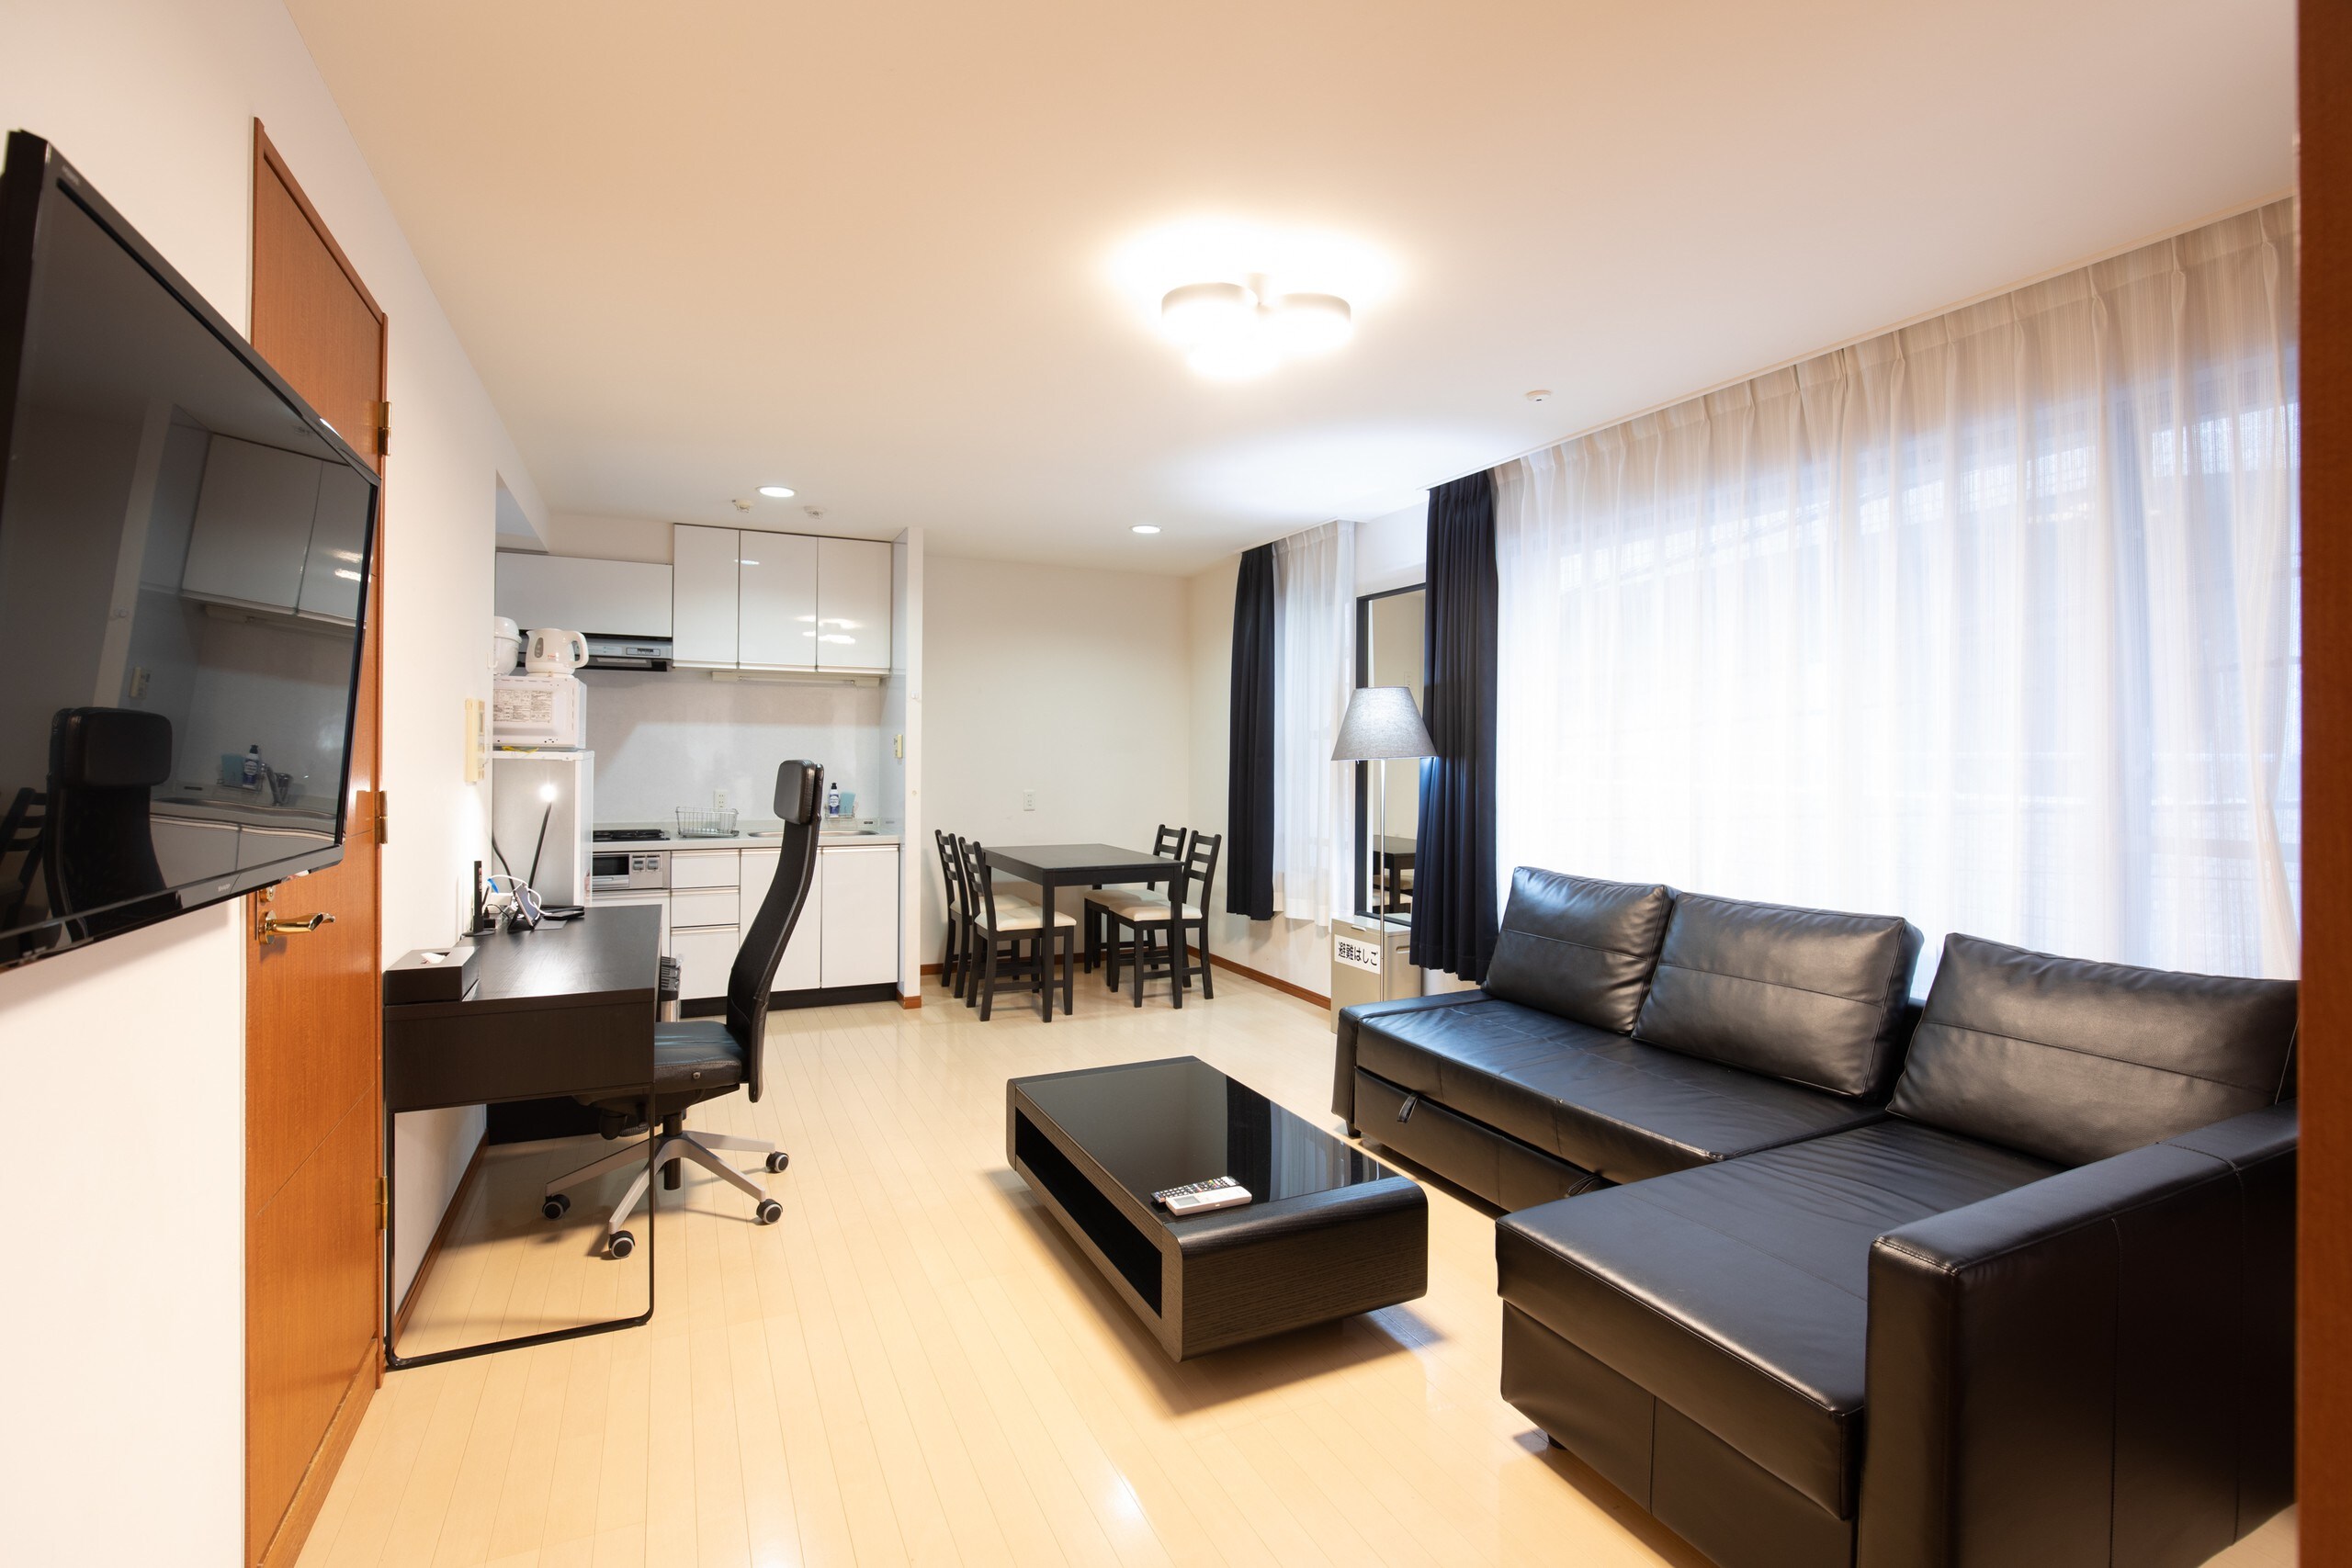 Property Image 1 - Lovely Modern Apartment in Minato Ward area  